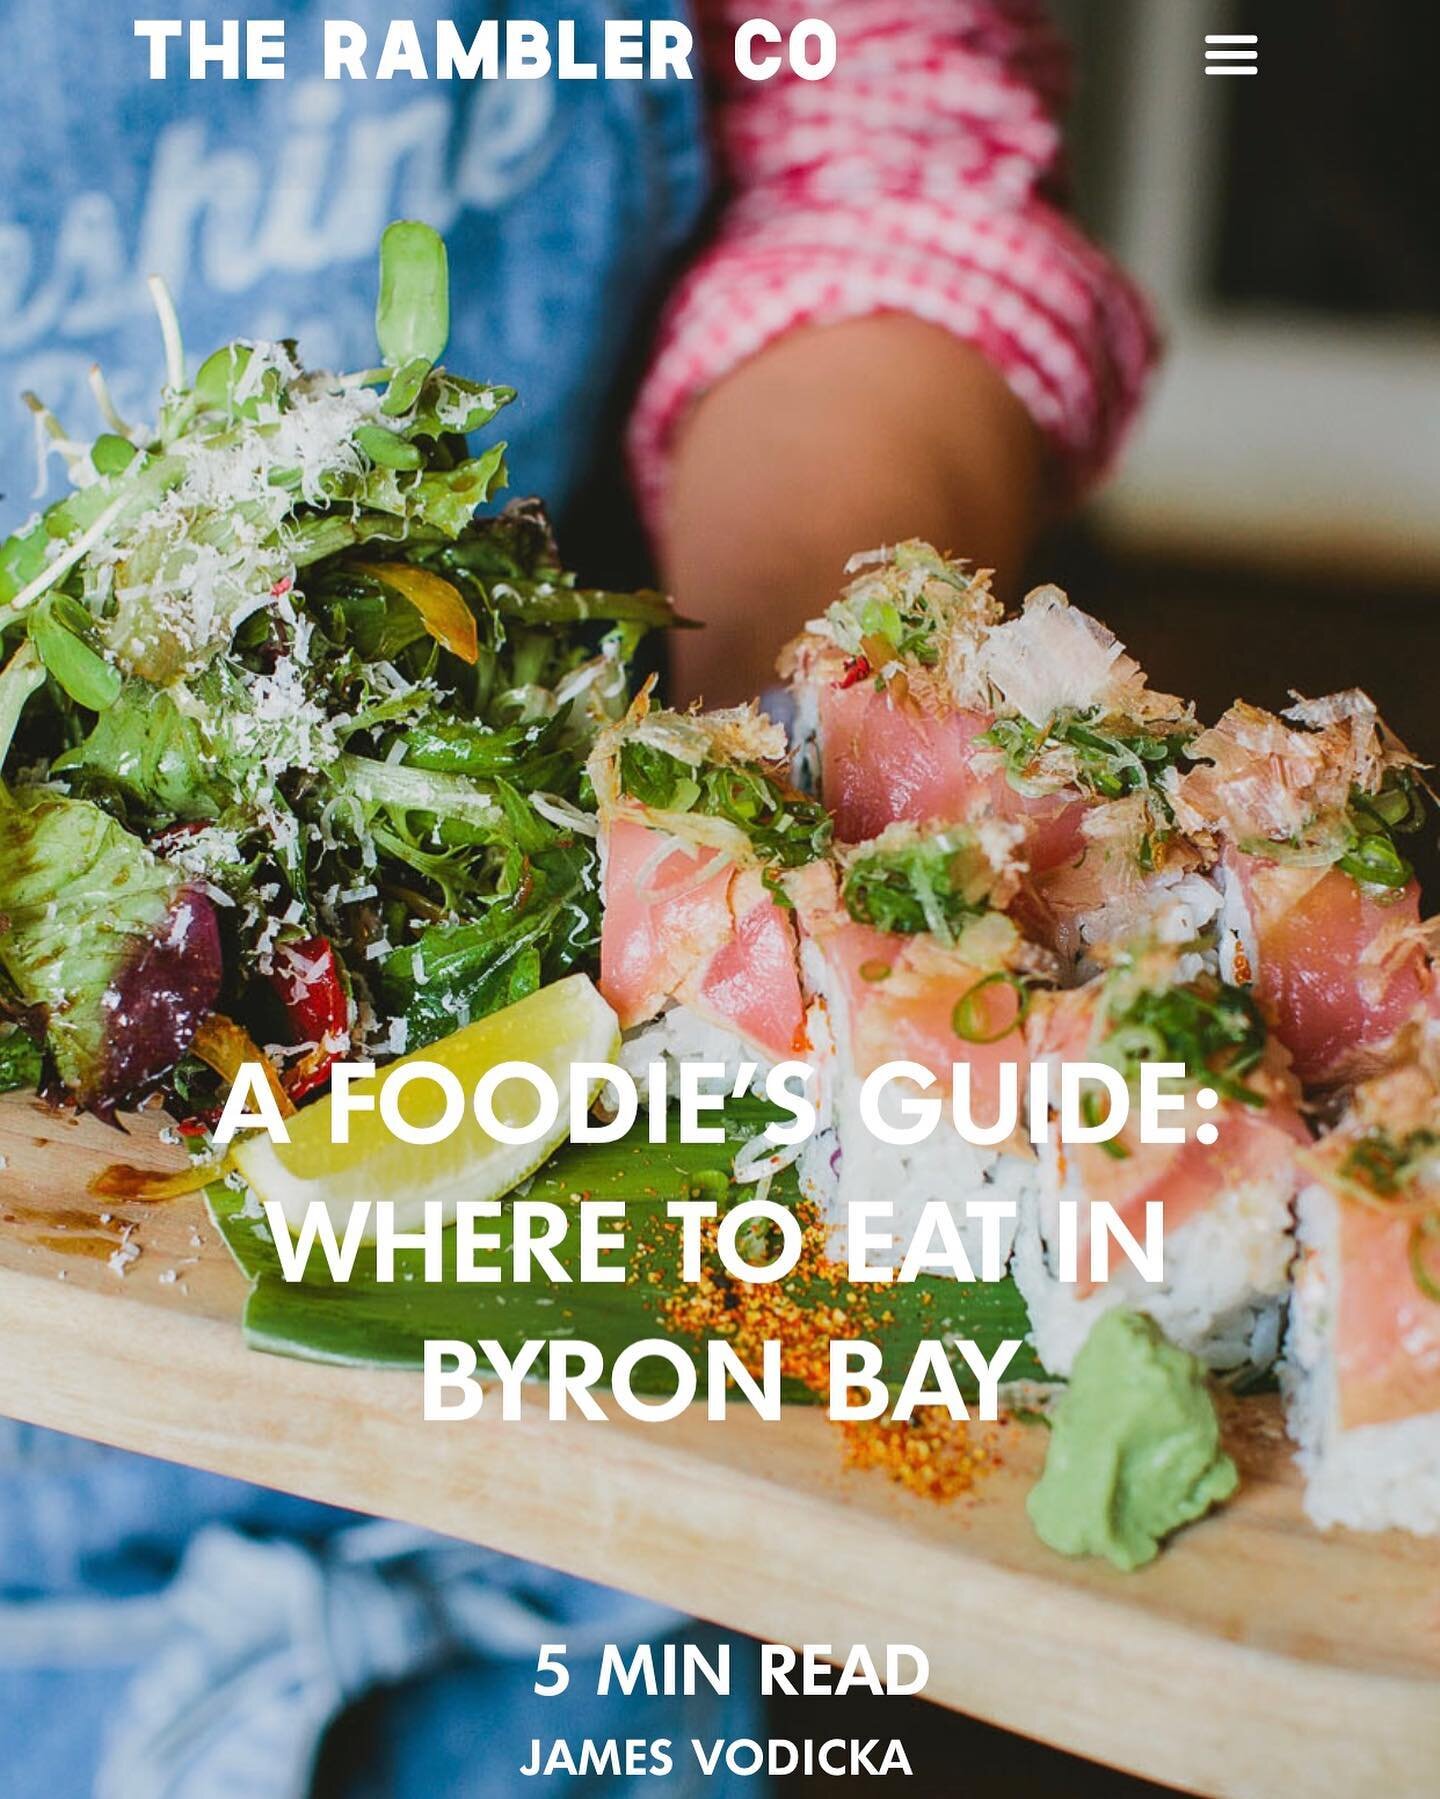 Thanks so much @theramblerco + @jamesvodicka for the awesome write up ✌🏼 
&bull;

https://www.therambler.co/blog/a-foodies-guide-where-to-eat-in-byron-bay